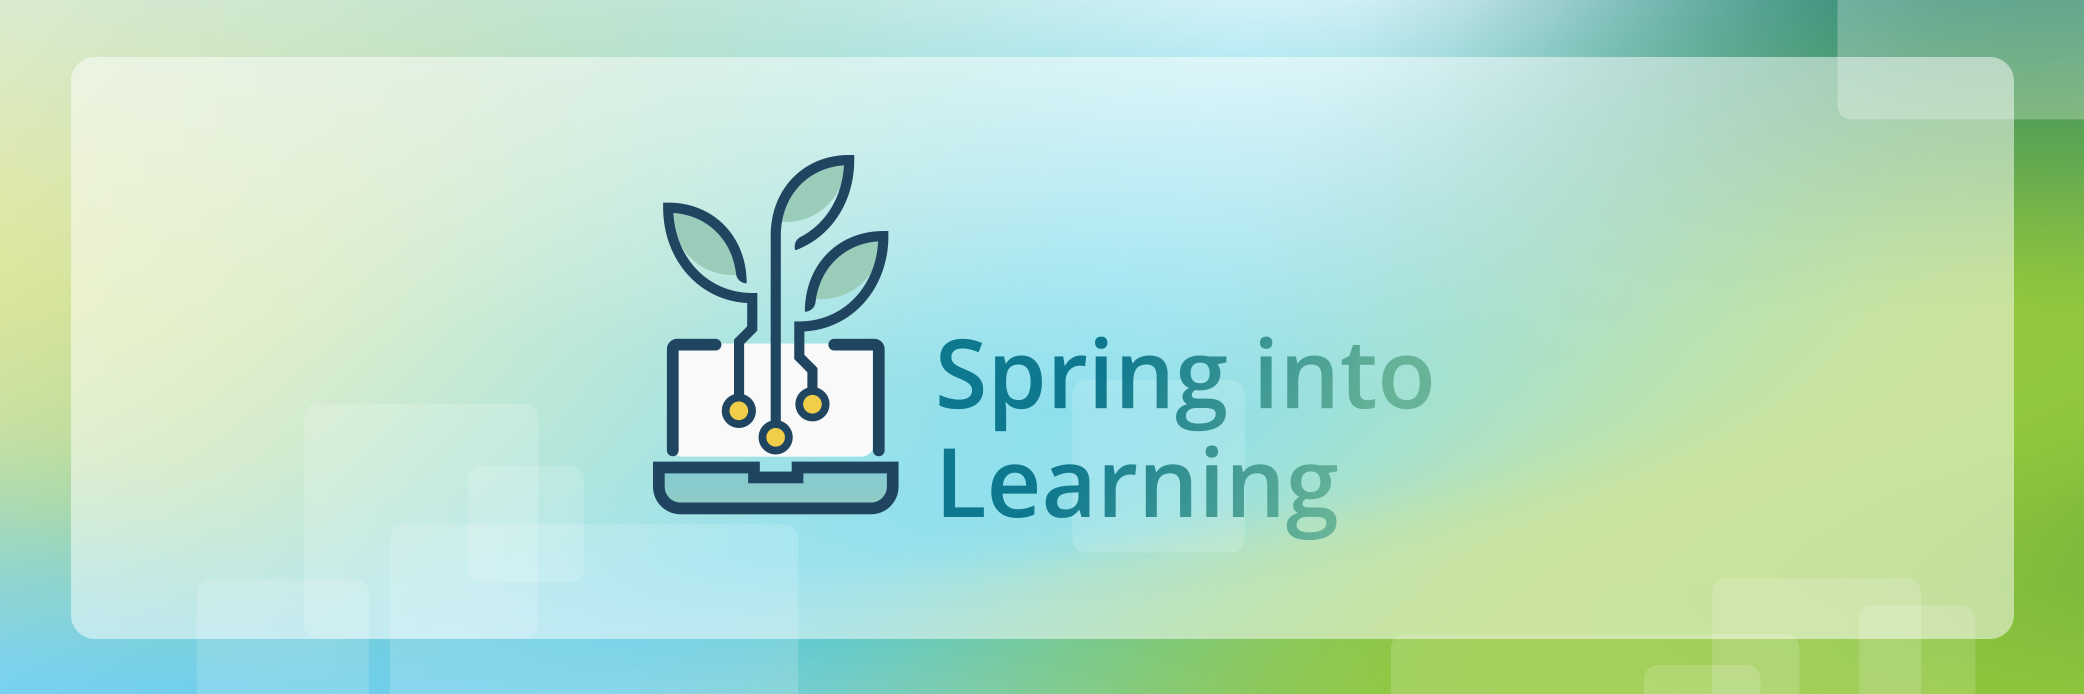 Grow Your Knowledge Garden: Introducing BenchPrep’s “Spring into Learning” Event